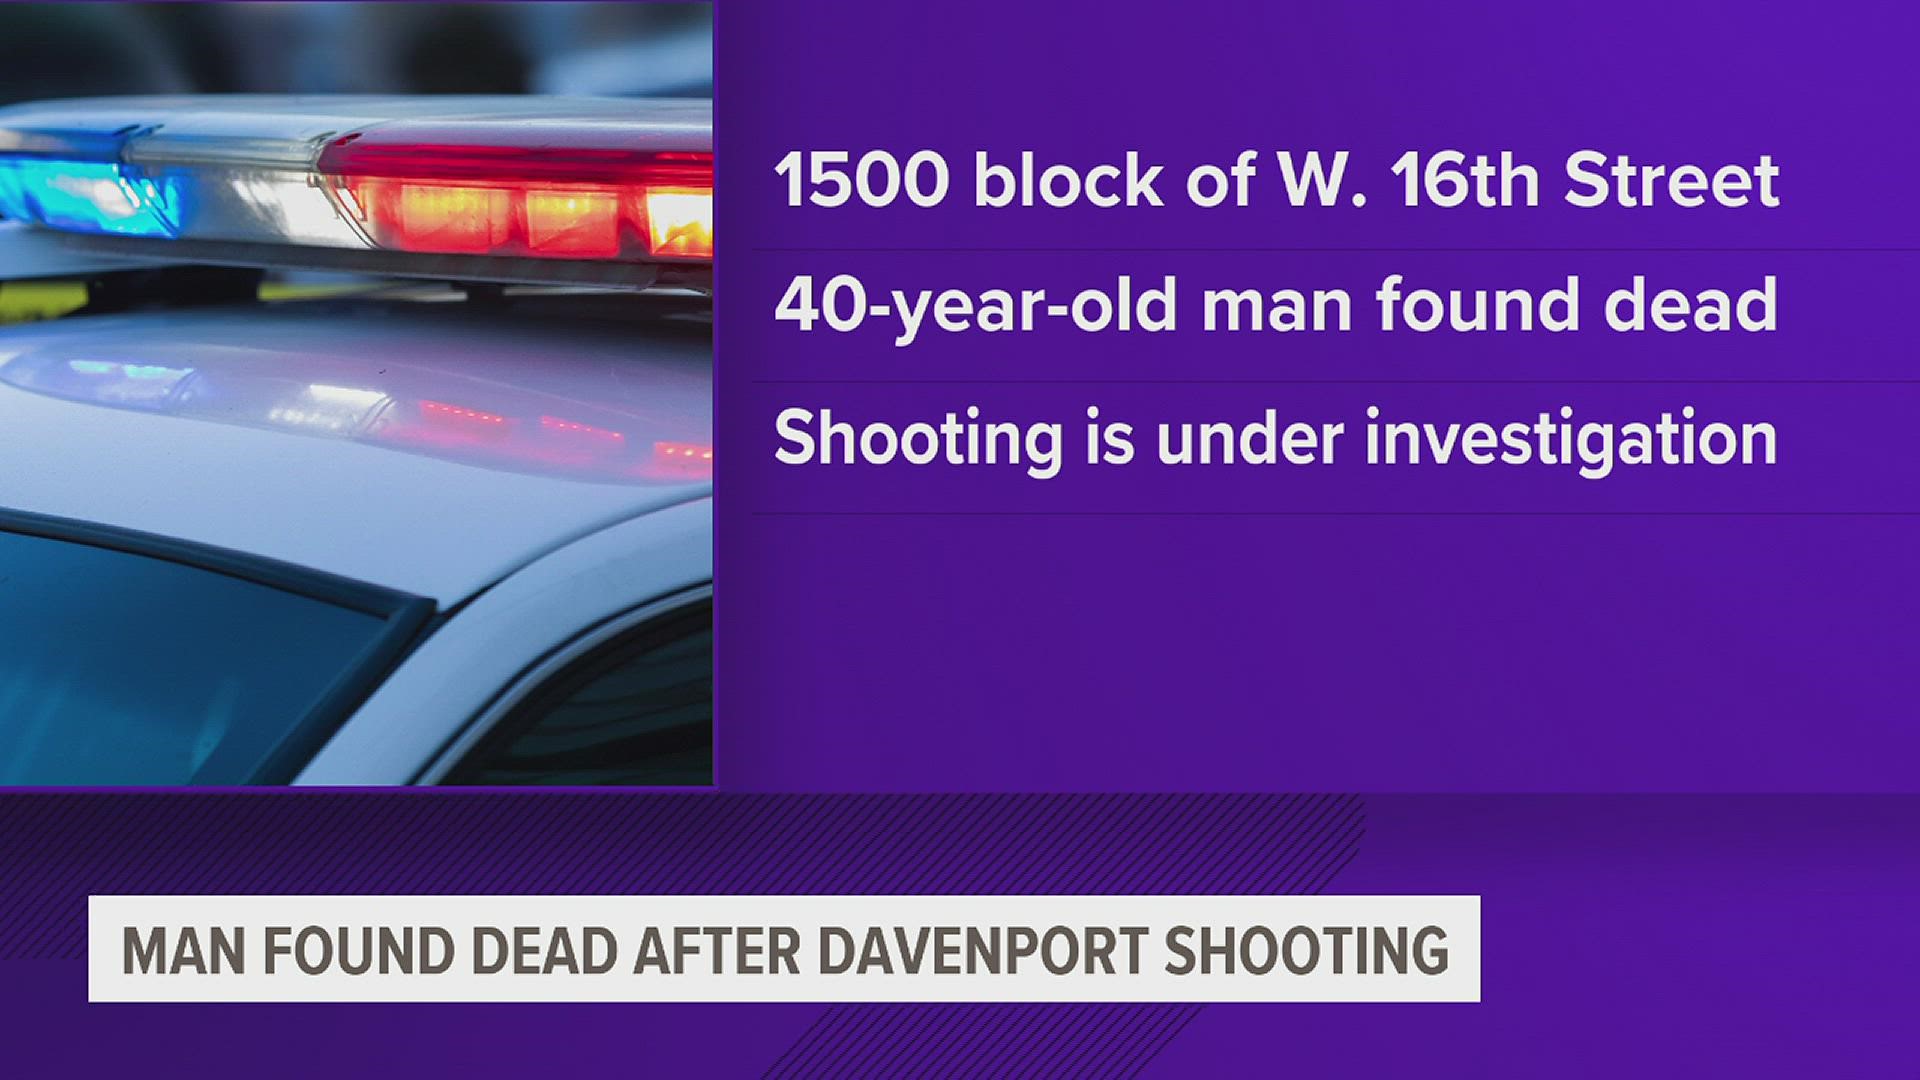 Around 5 a.m., police responded to a shots fired call on West 16th Street and found the man deceased with a gunshot wound.